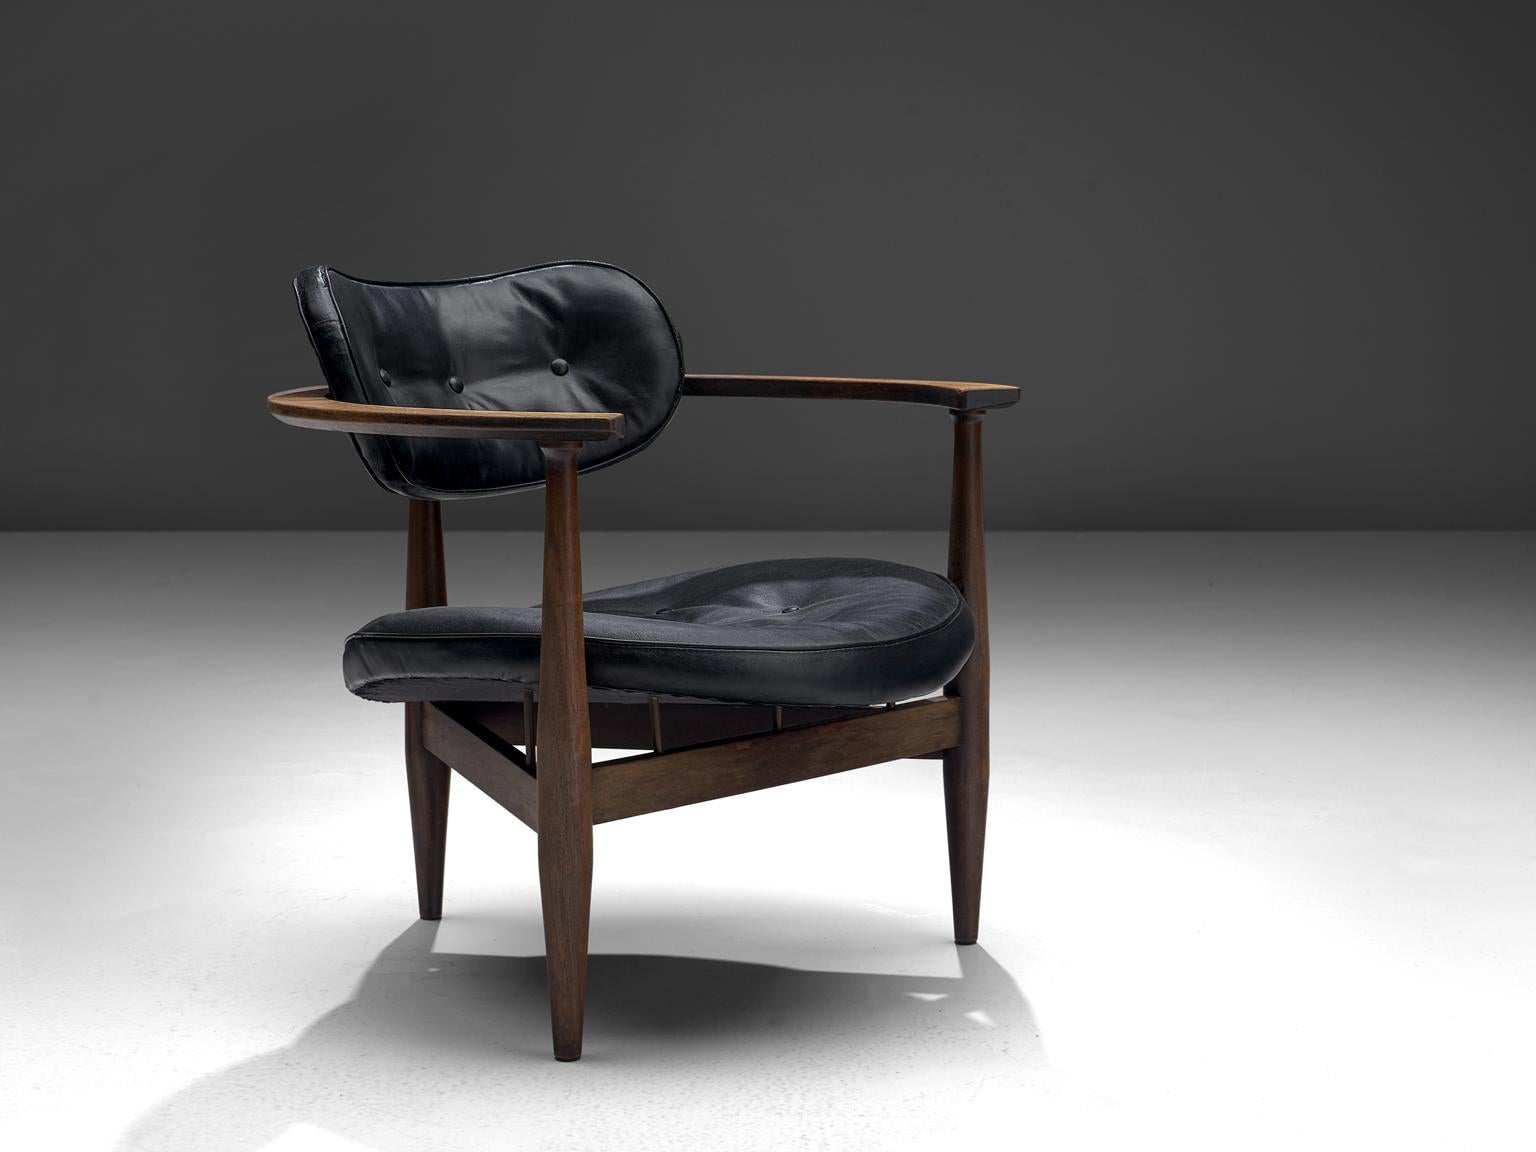 Kor Aldershof lounge chair, black leather, wood, the Netherlands, 1960s.

This sculptural lounge chair has a butterfly shaped back and a round seat. The frame is softly shaped and holds elegant details such as the tiny wooden pins underneath the